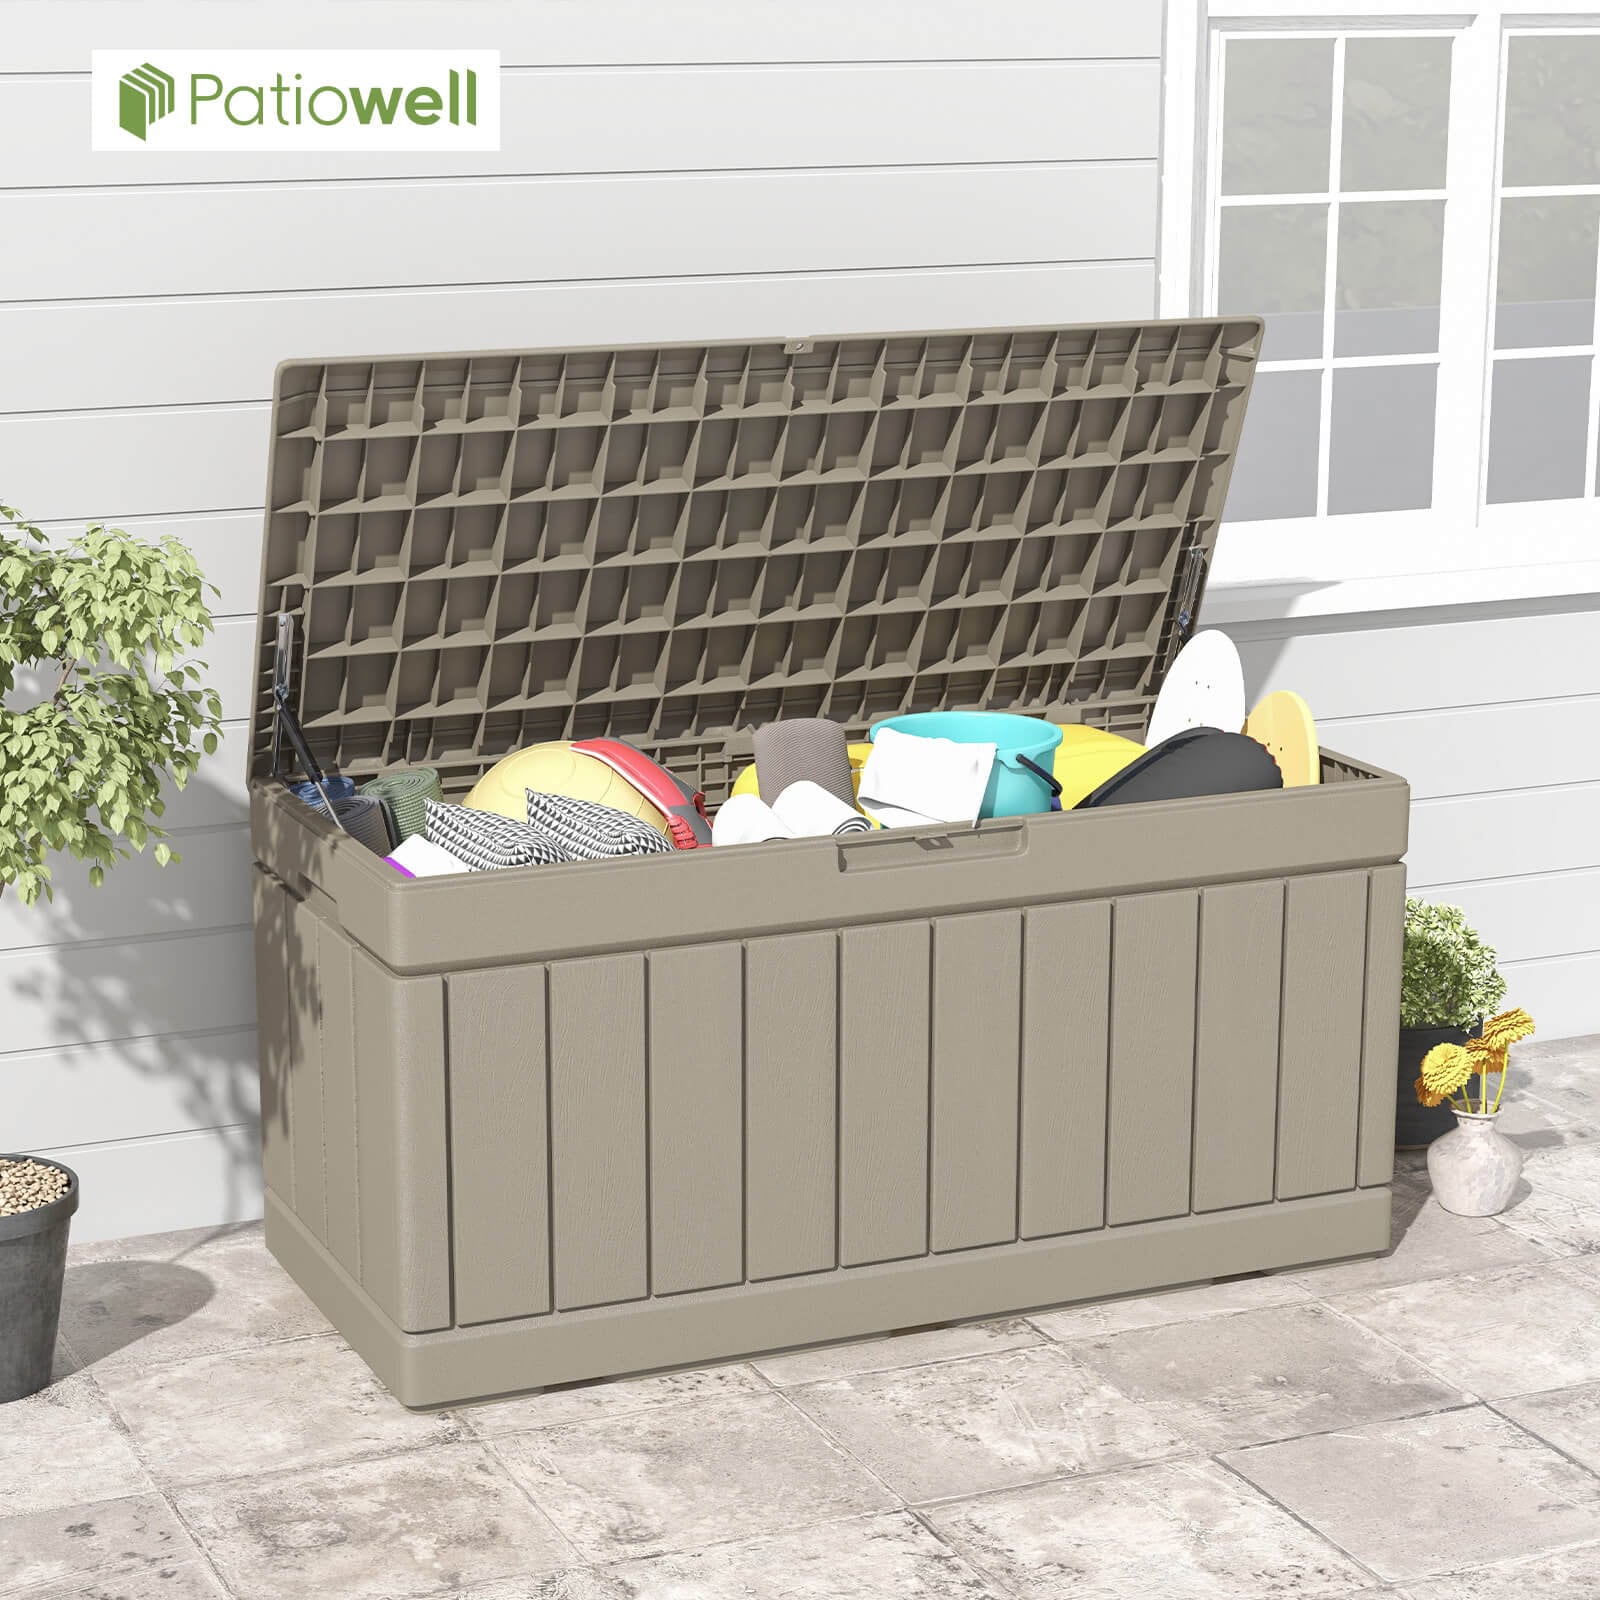 Patiowell 46.4-in L x 20.8-in 82-Gallons Light Brown Plastic Deck Box ...